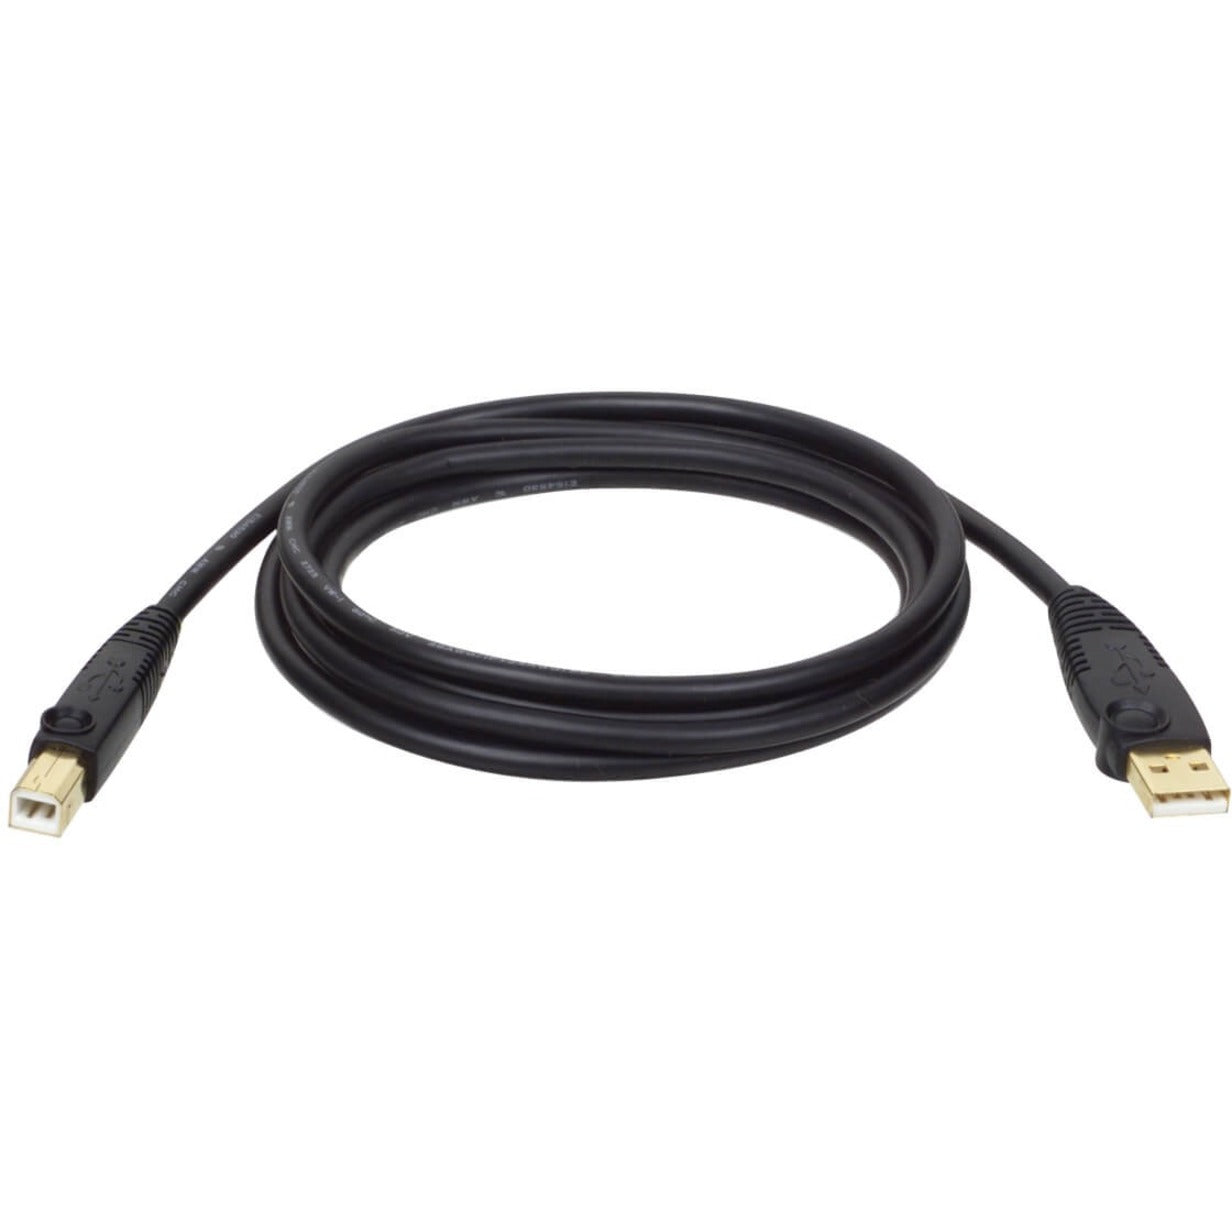 Tripp Lite U022-006 USB 2.0 A/B Cable, 6 ft Gold Plated, High-Speed Data Transfer